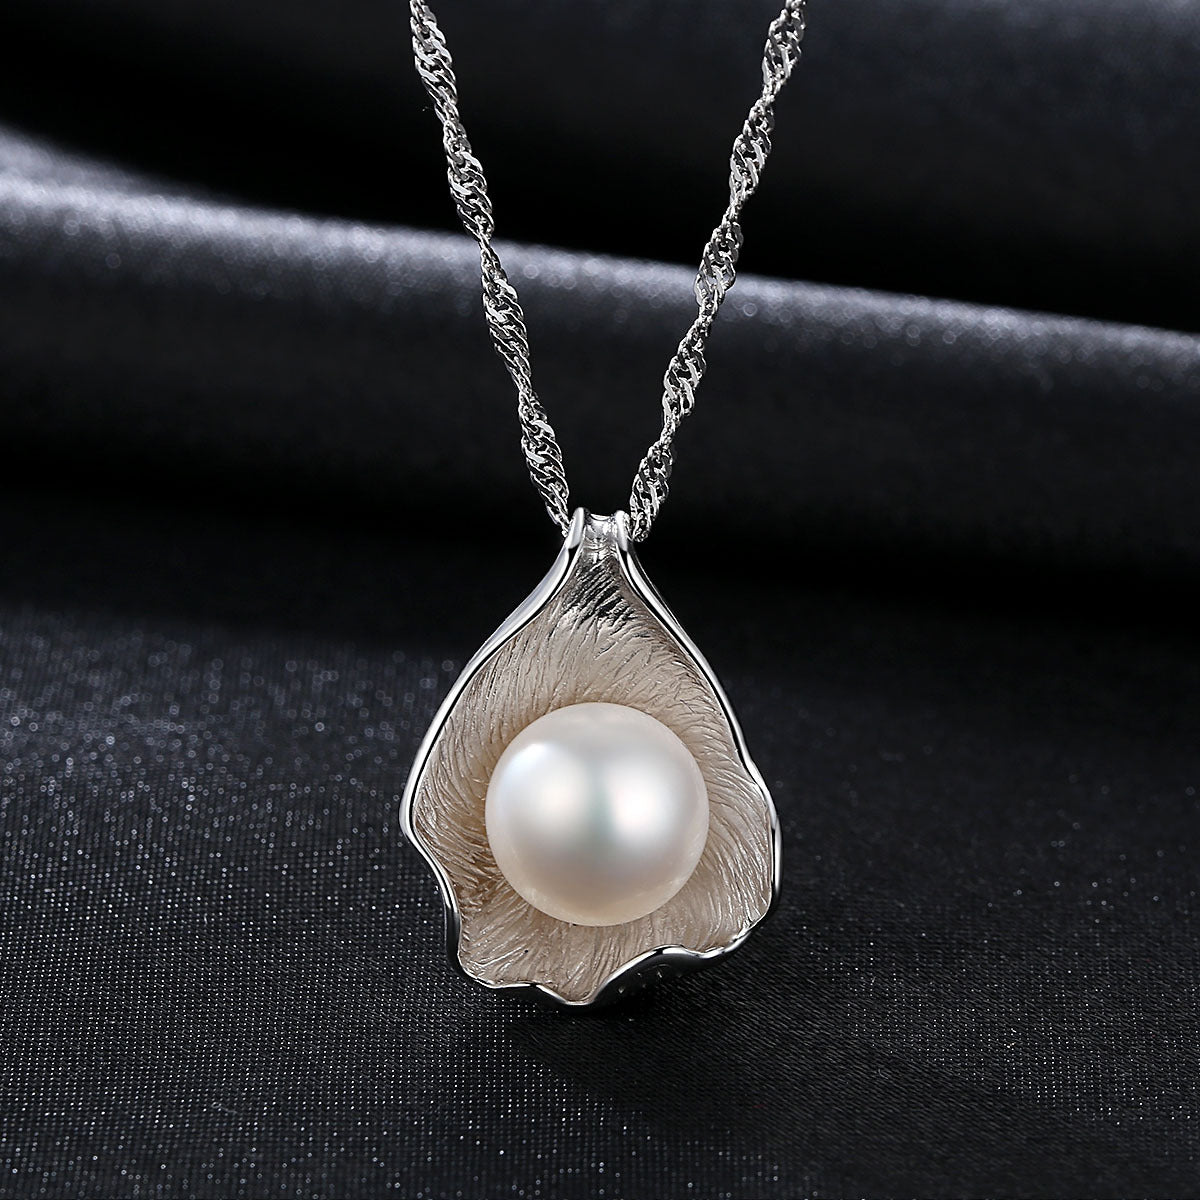 Grey Pearl Pendant Necklace - HERS